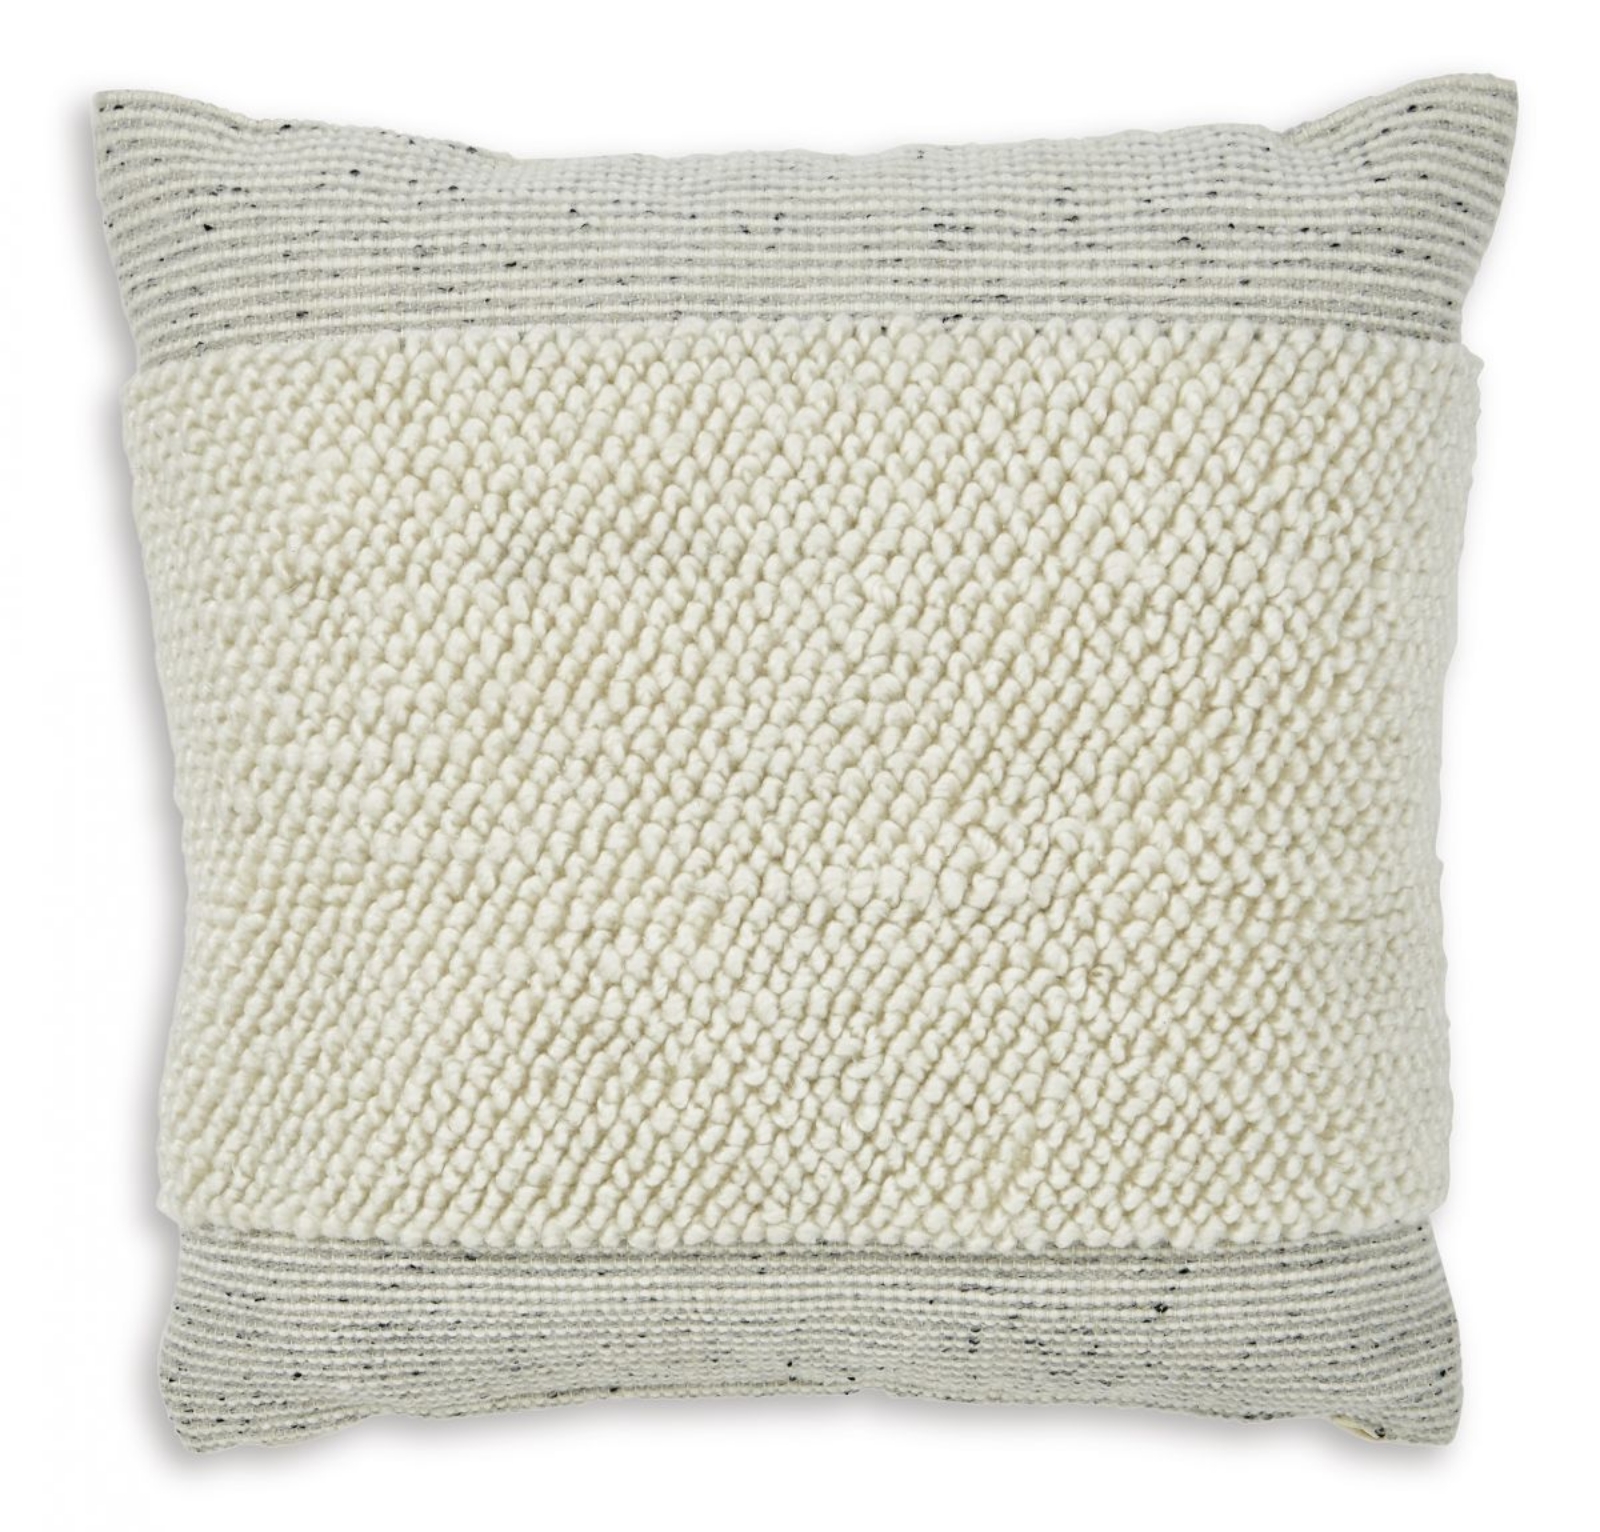 Picture of Rowcher Accent Pillow